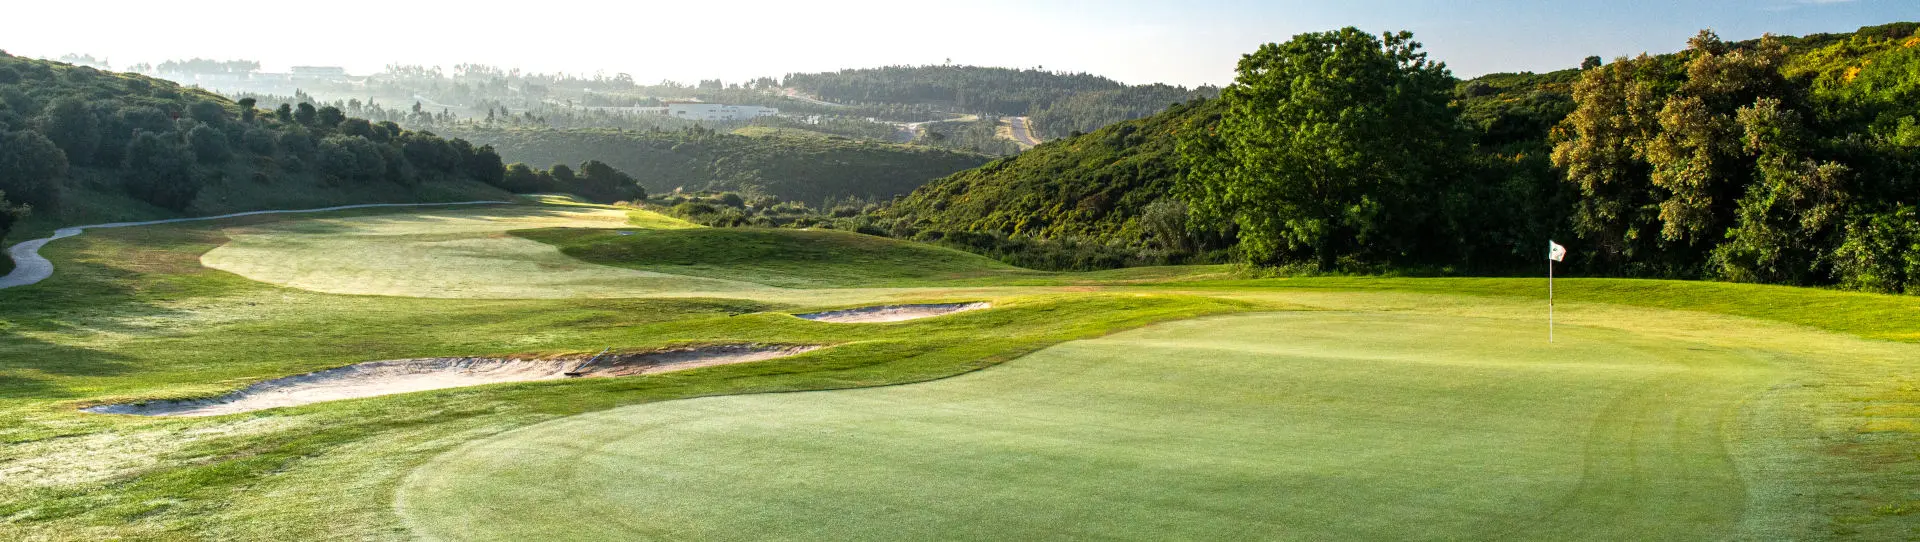 Portugal golf courses - Belas Clube Campo - Photo 1